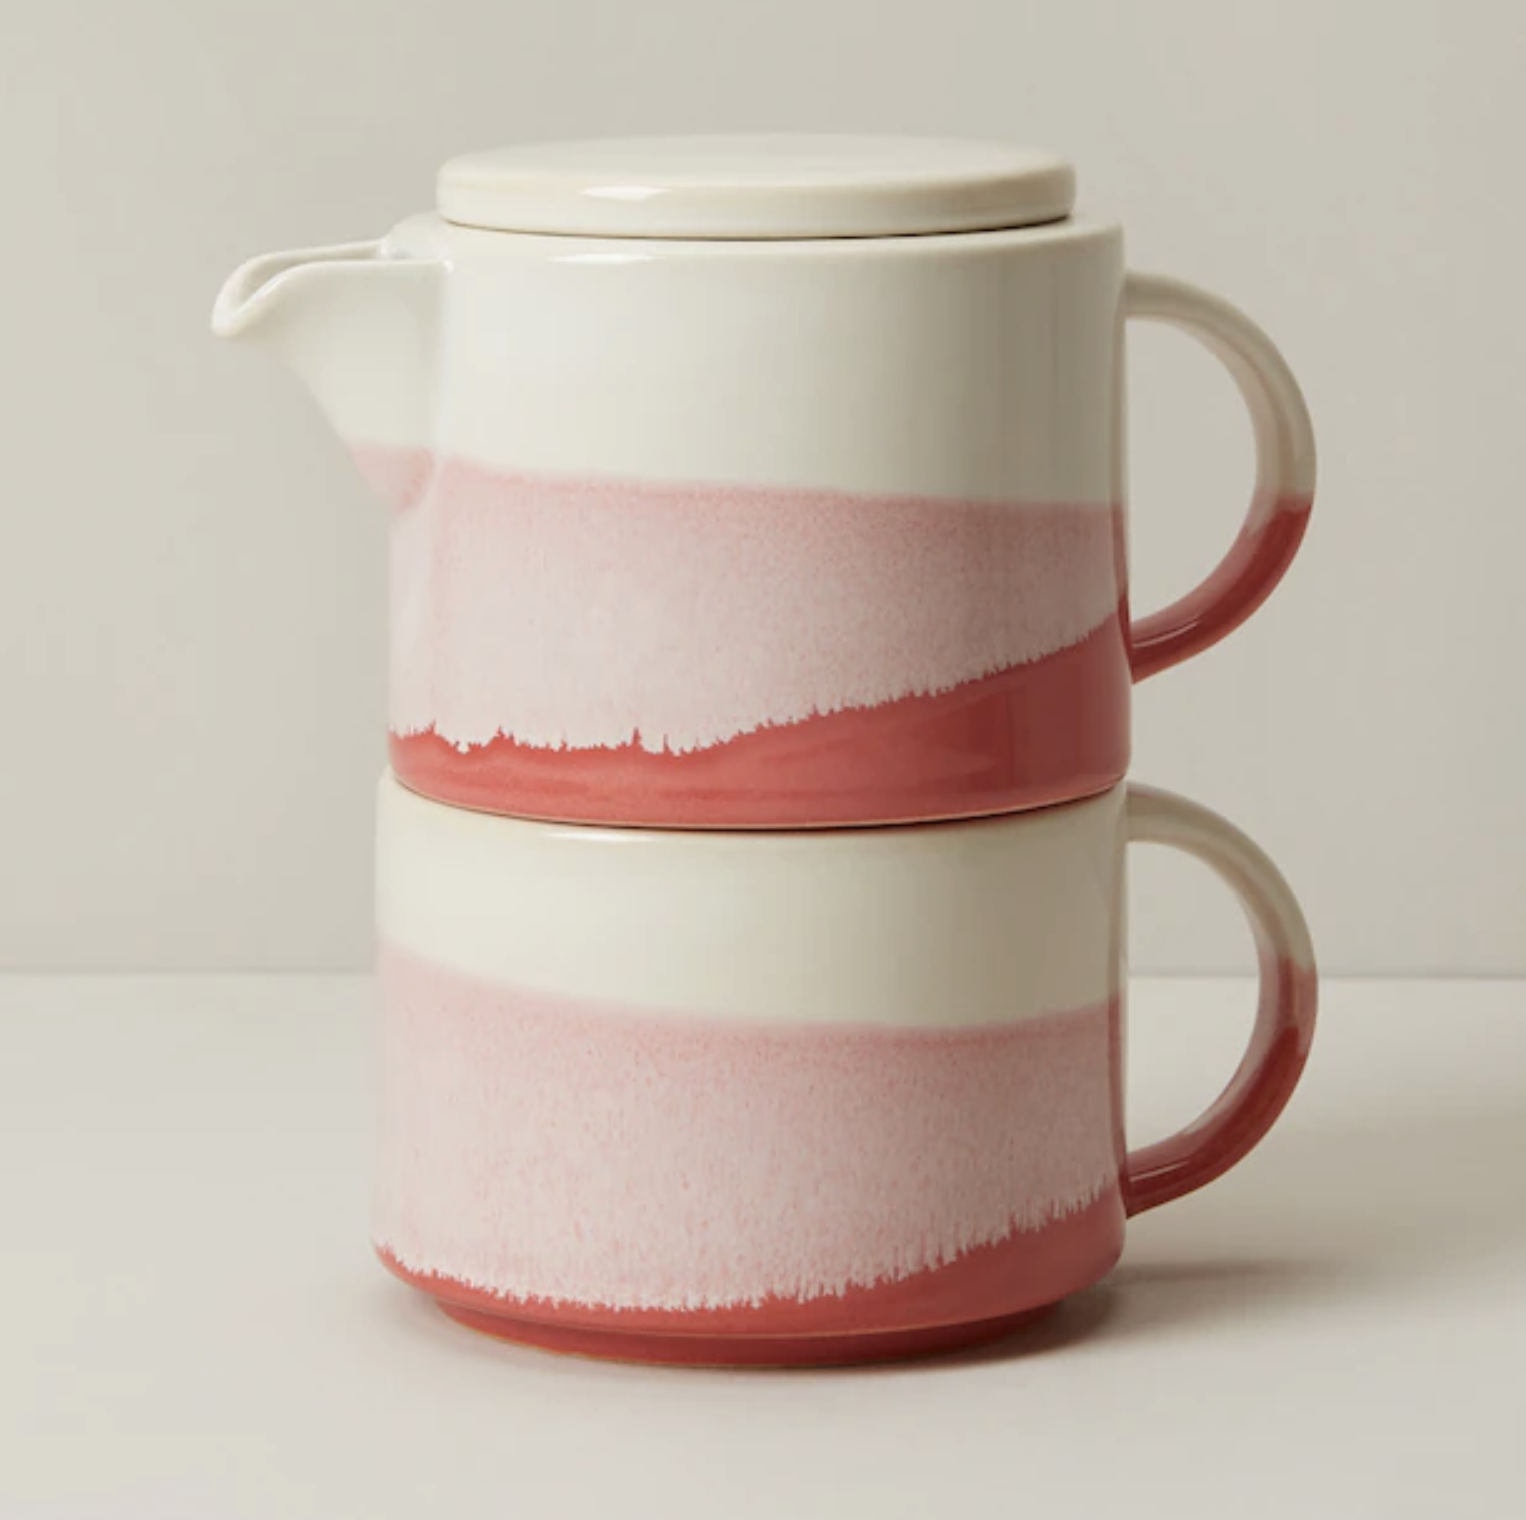 The stacked tea pot on a blank background